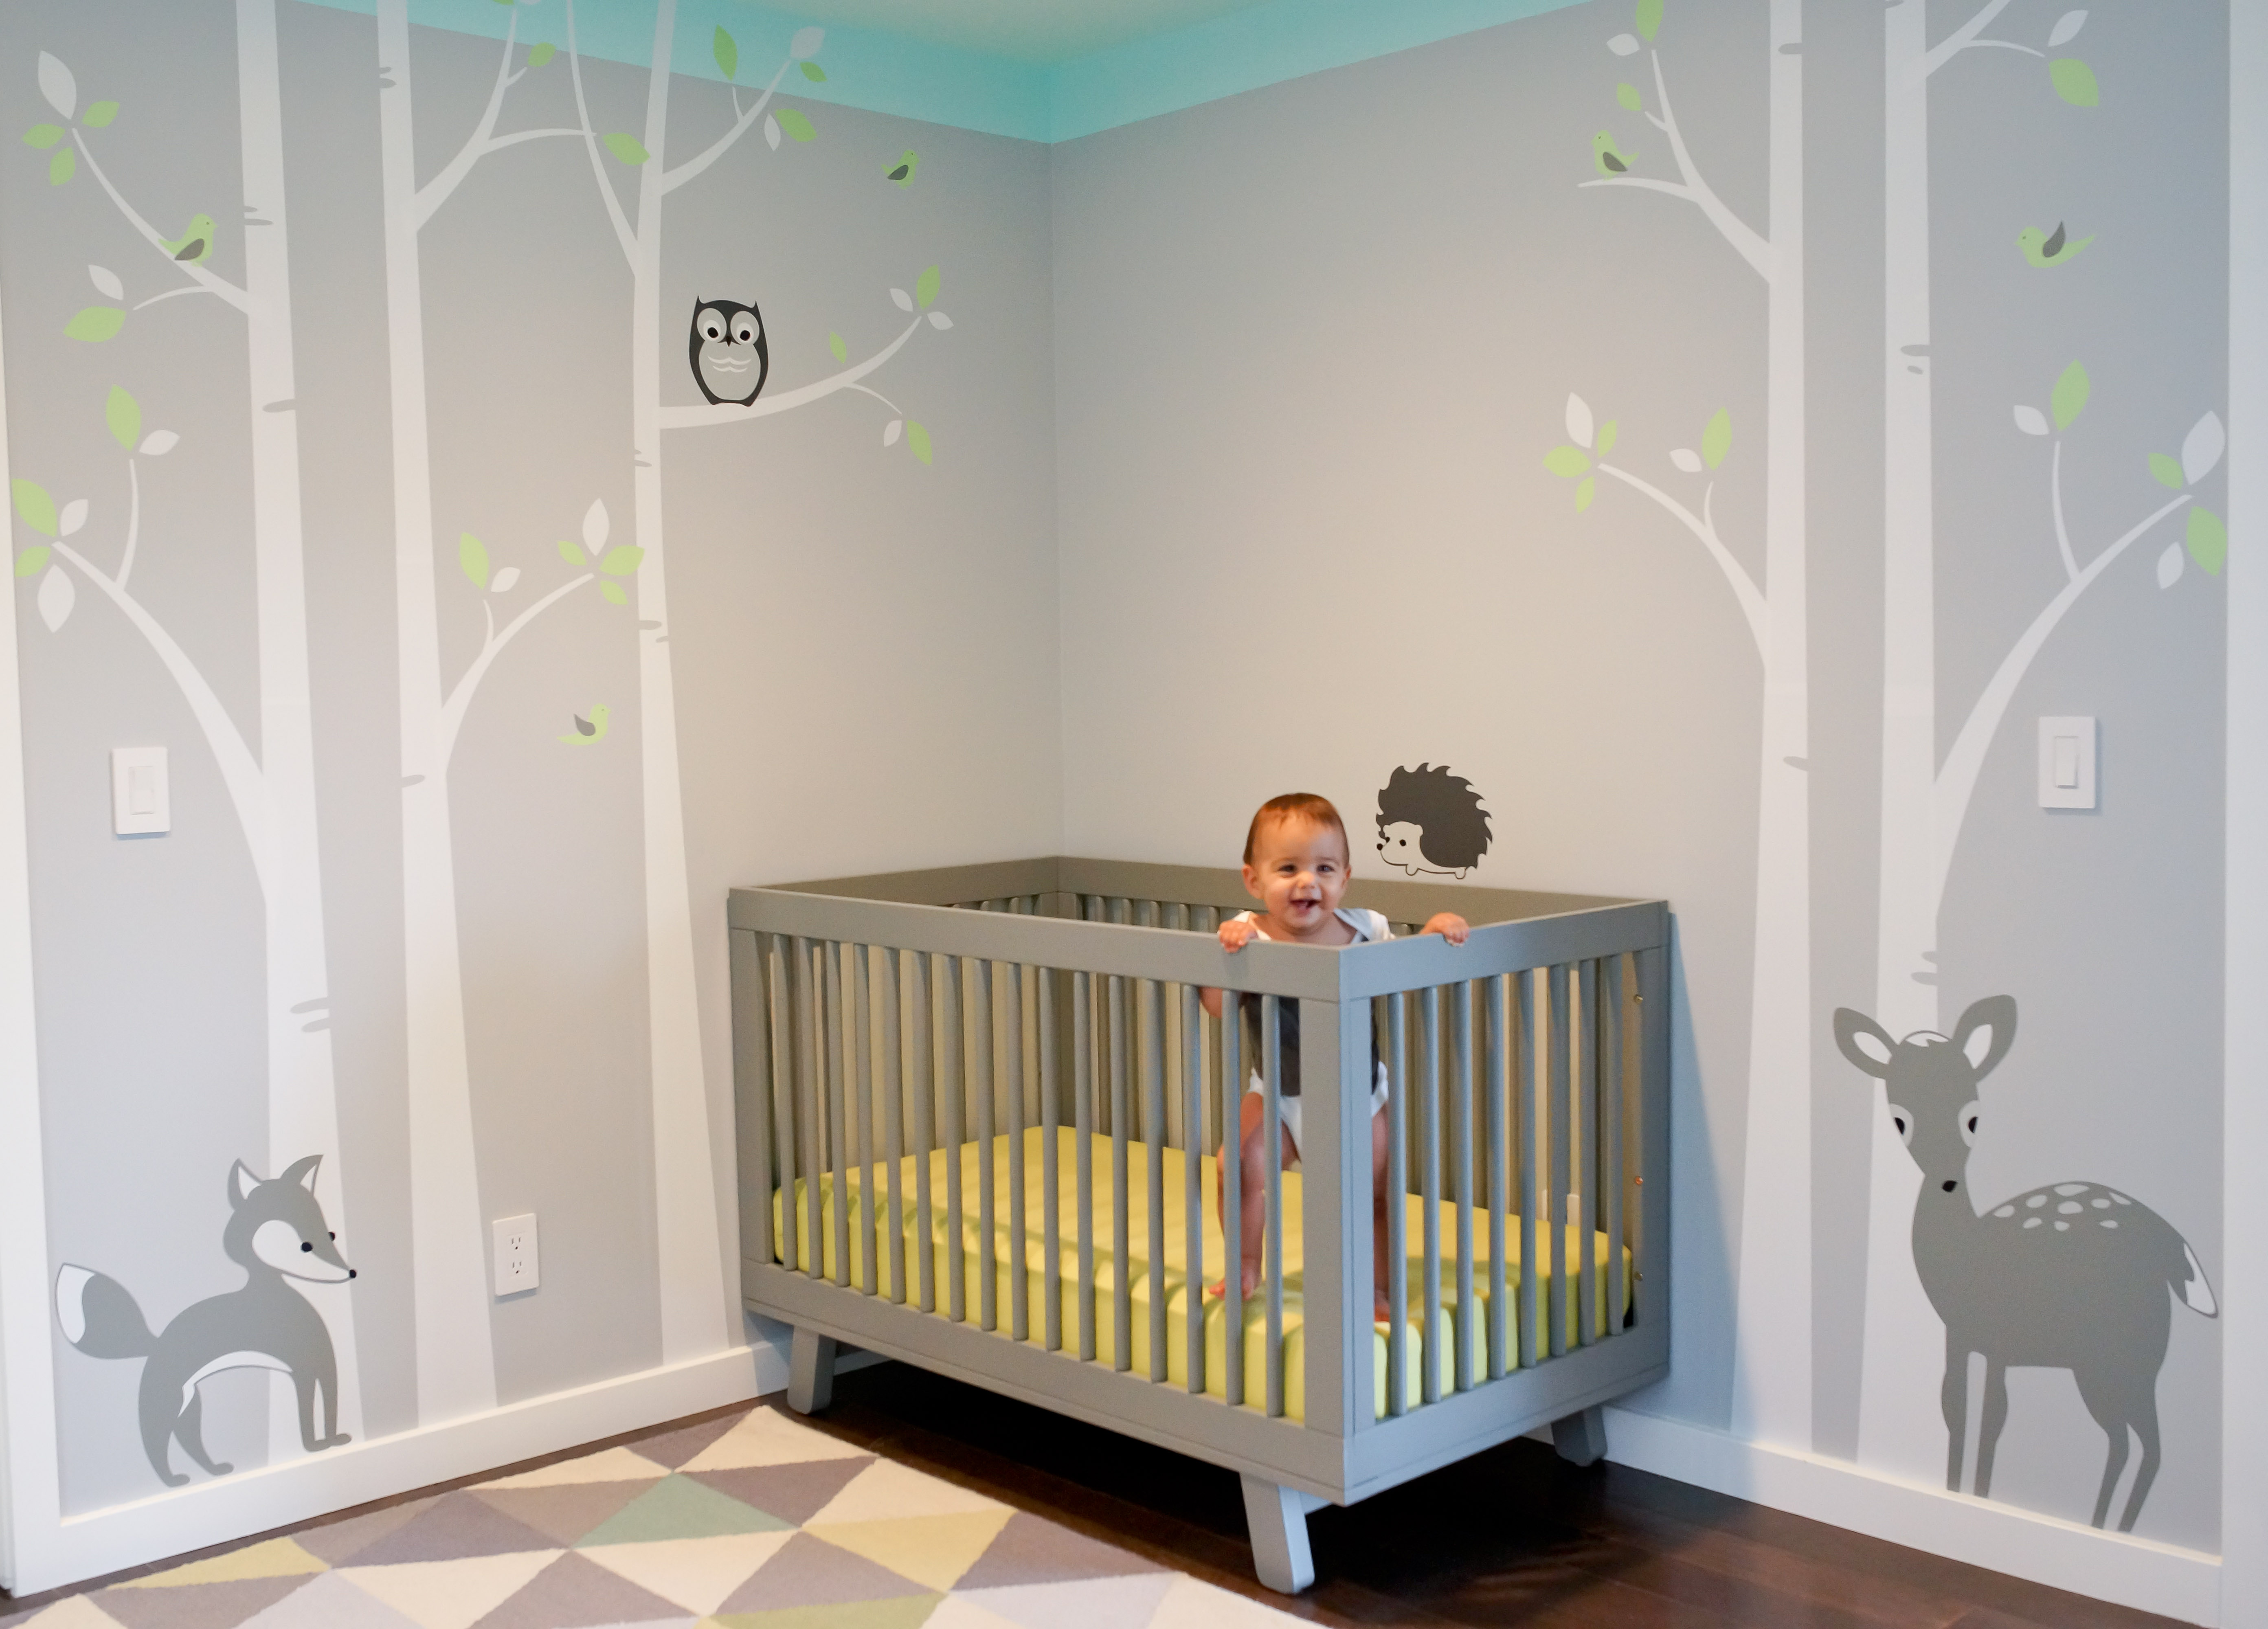 Best Nursery Wall Decals for Small Space